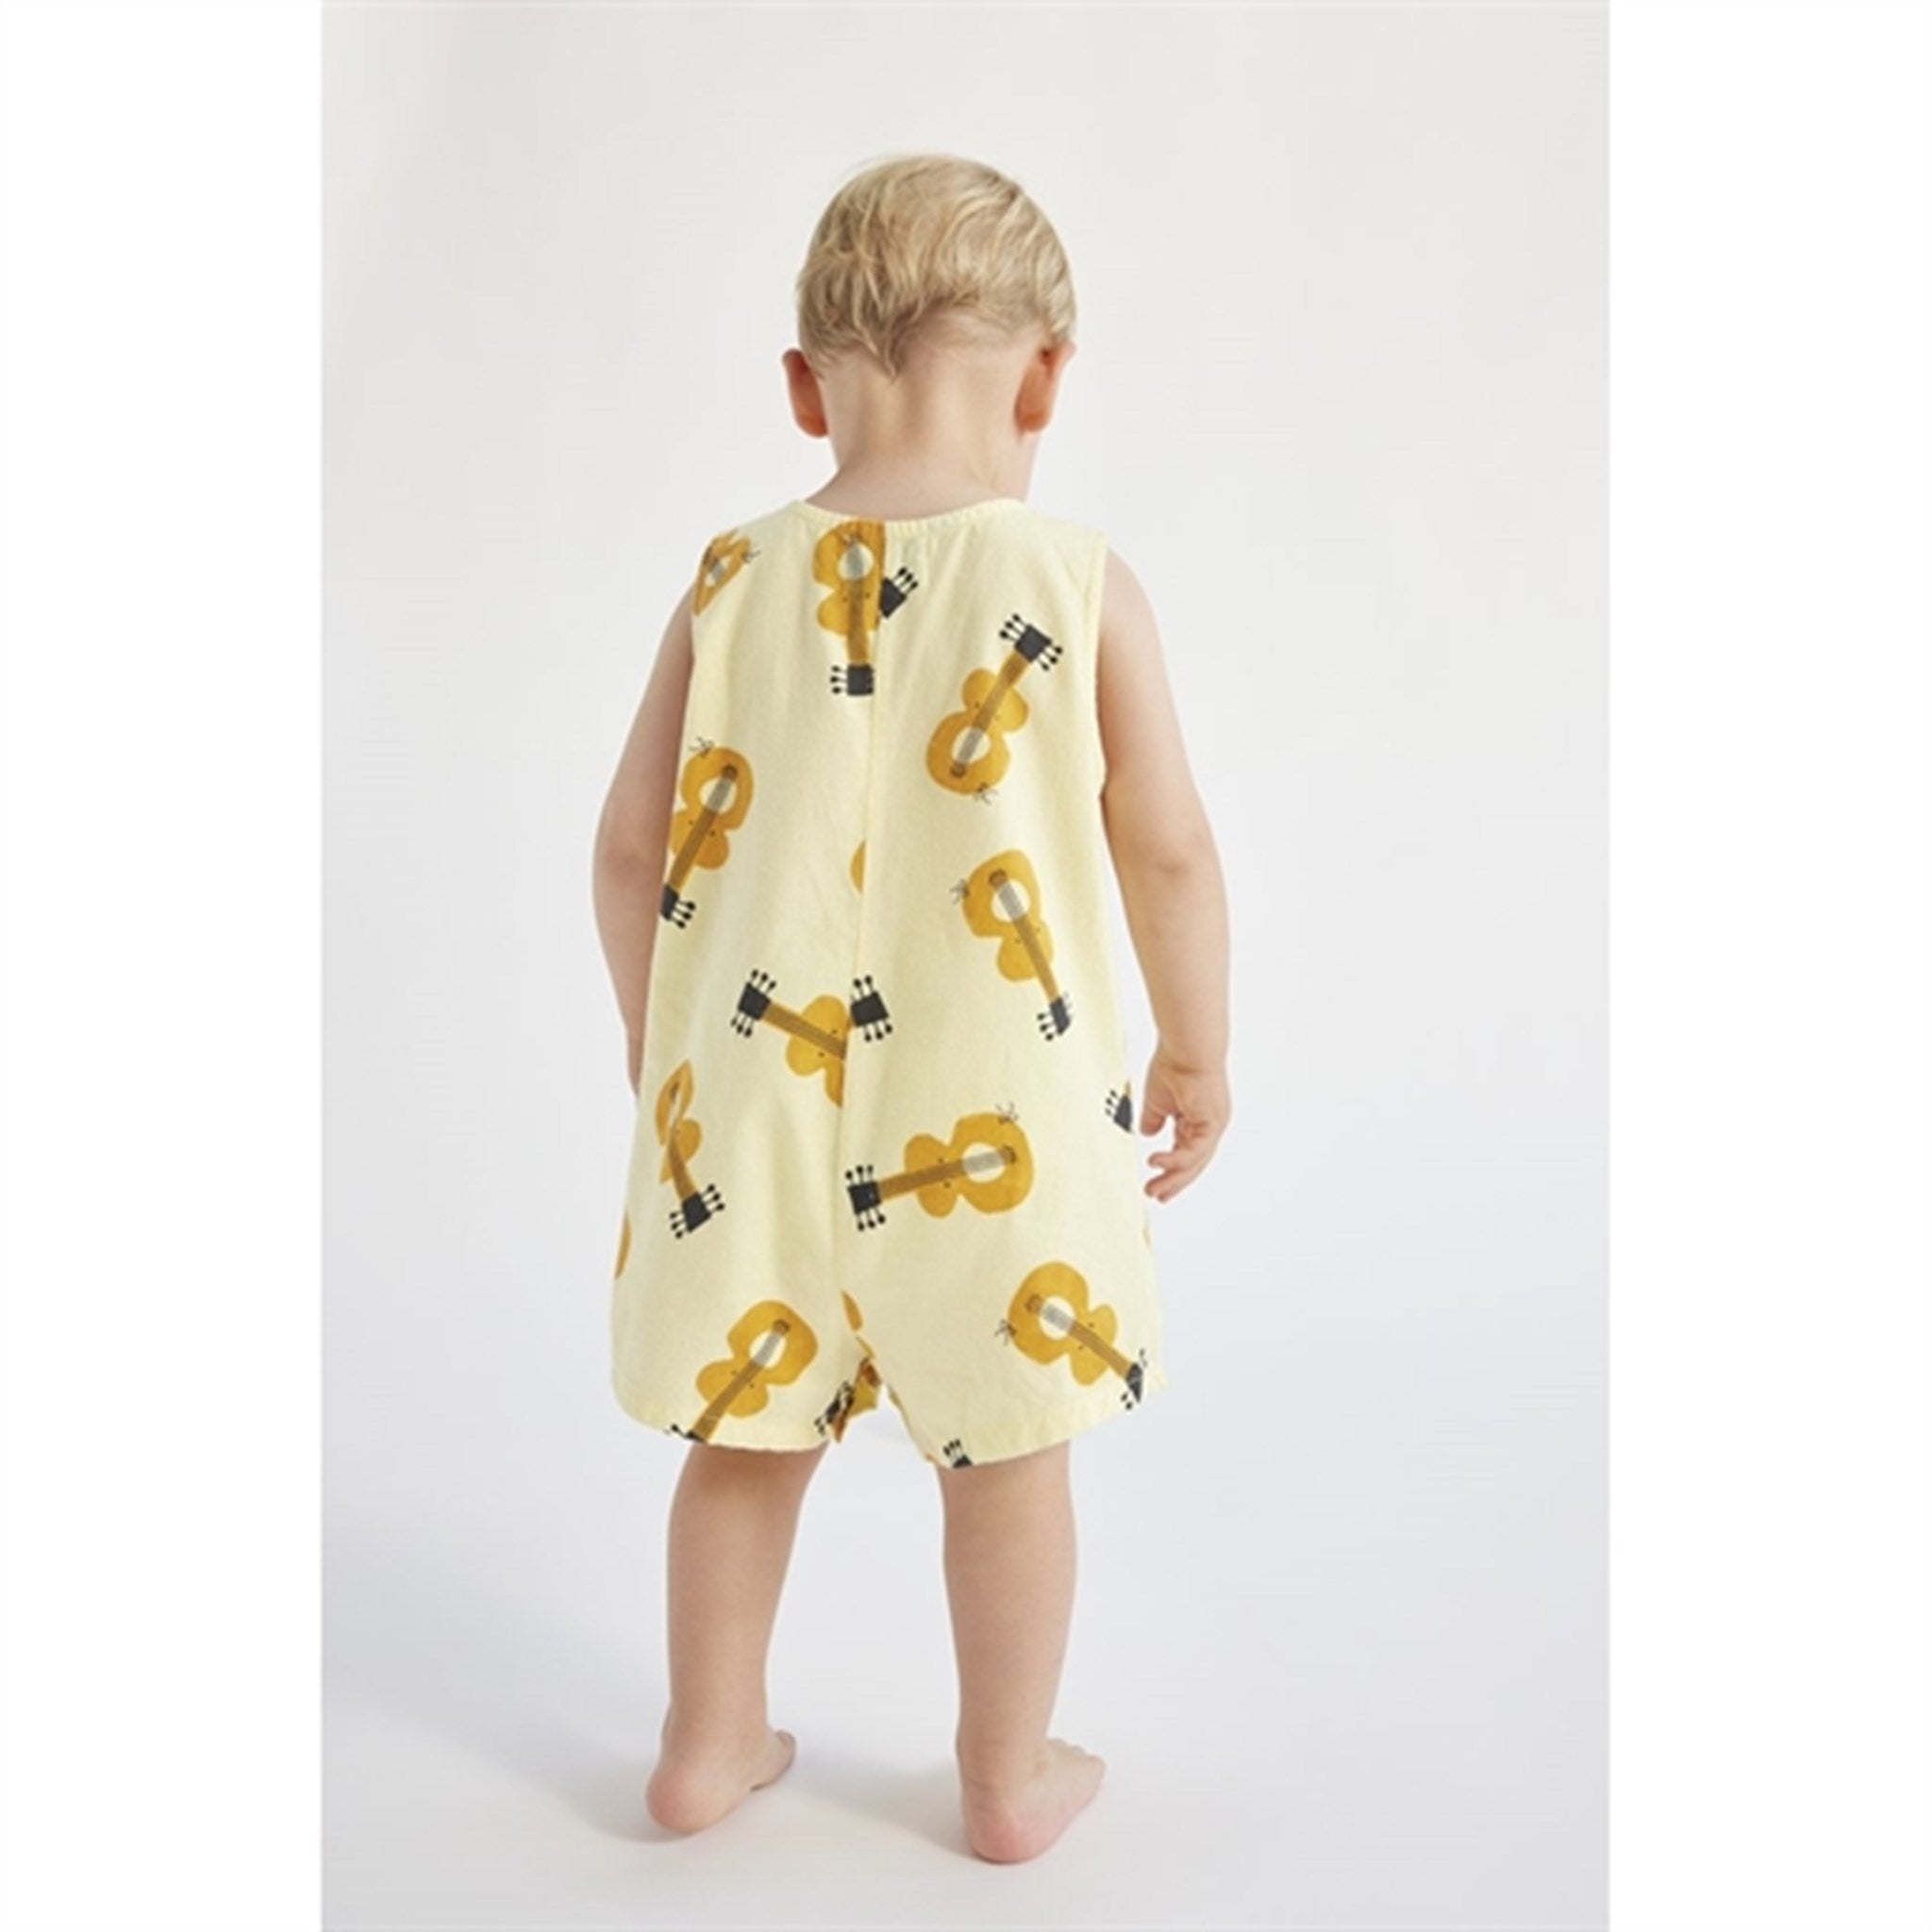 Bobo Choses Baby Acoustic Guitar All Over Woven Playsuit Sleeveless Light Yellow 5